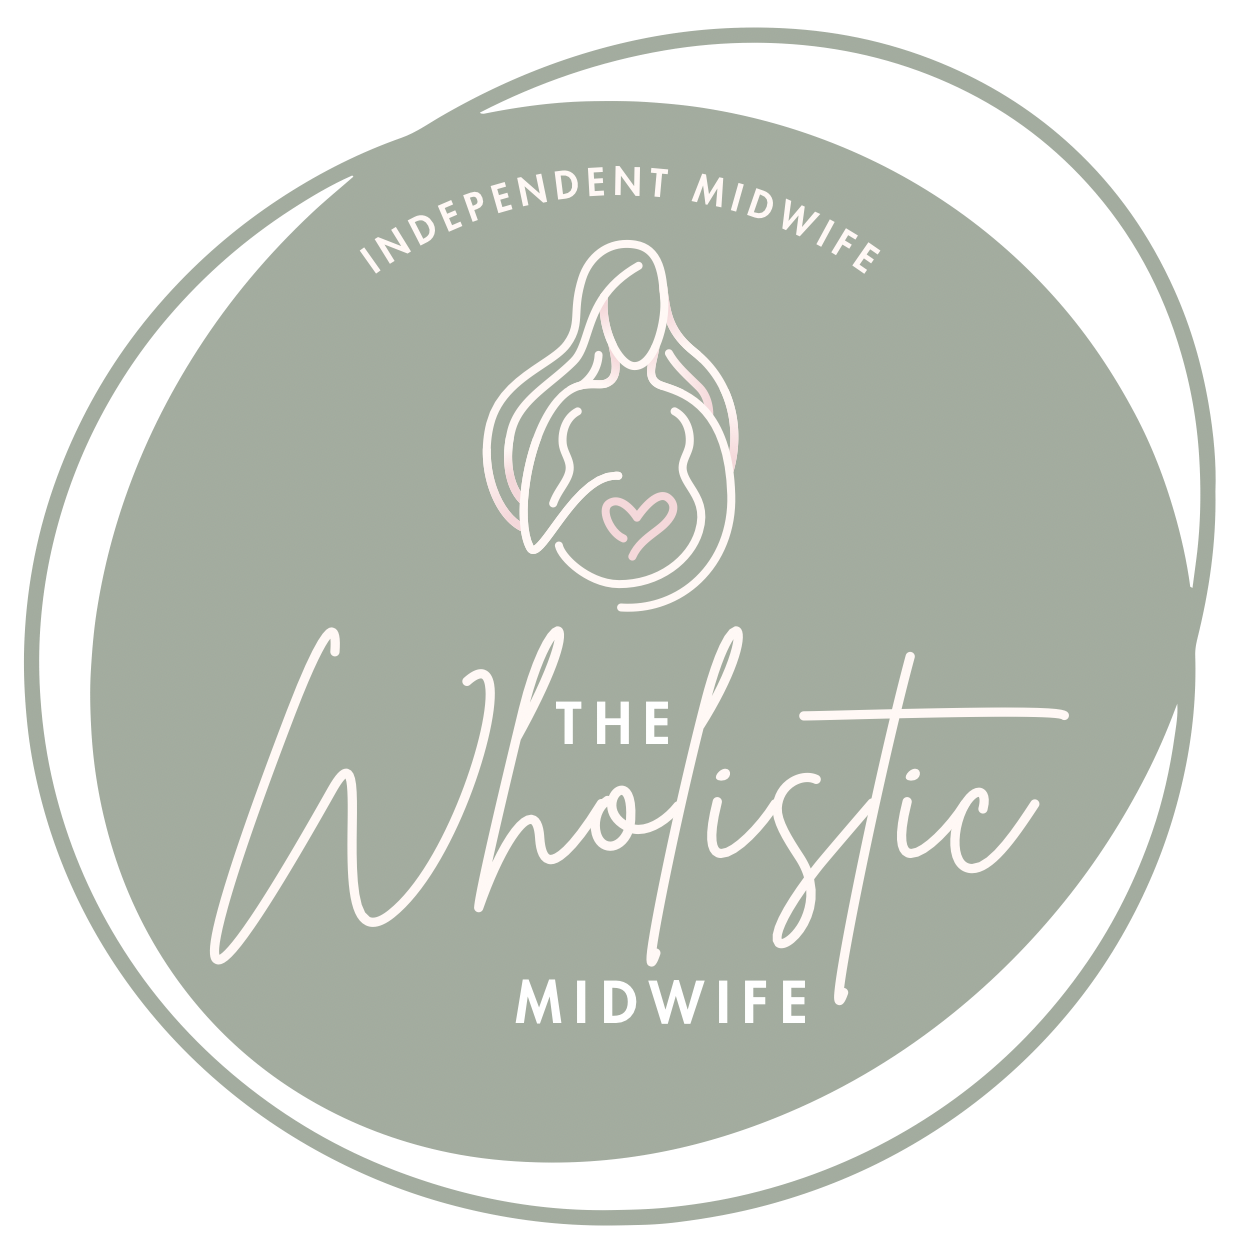 The Wholistic Midwife